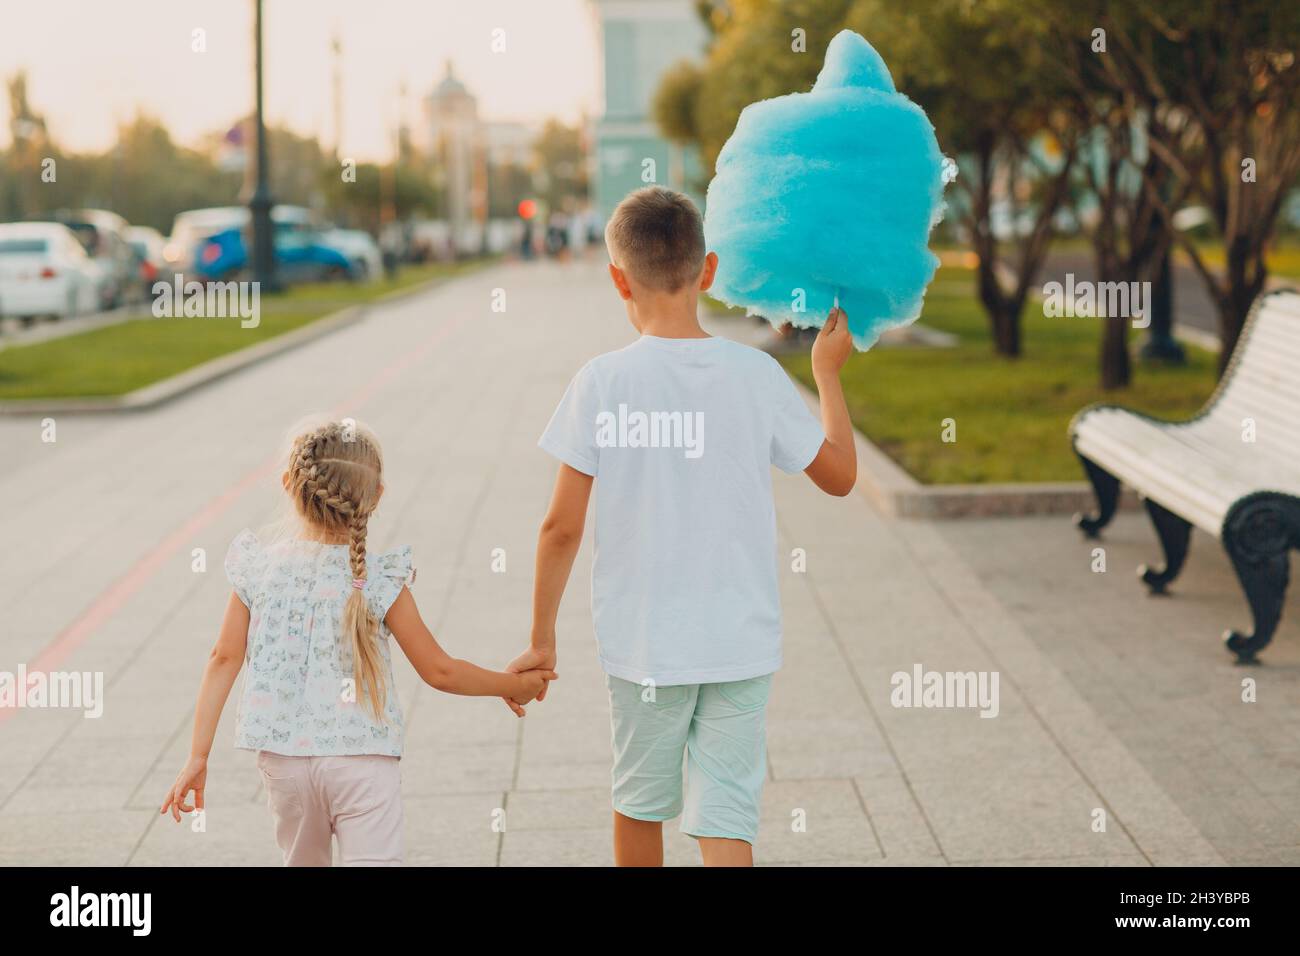 Happy children boy and girl eating blue cotton candy outdoors Stock Photo